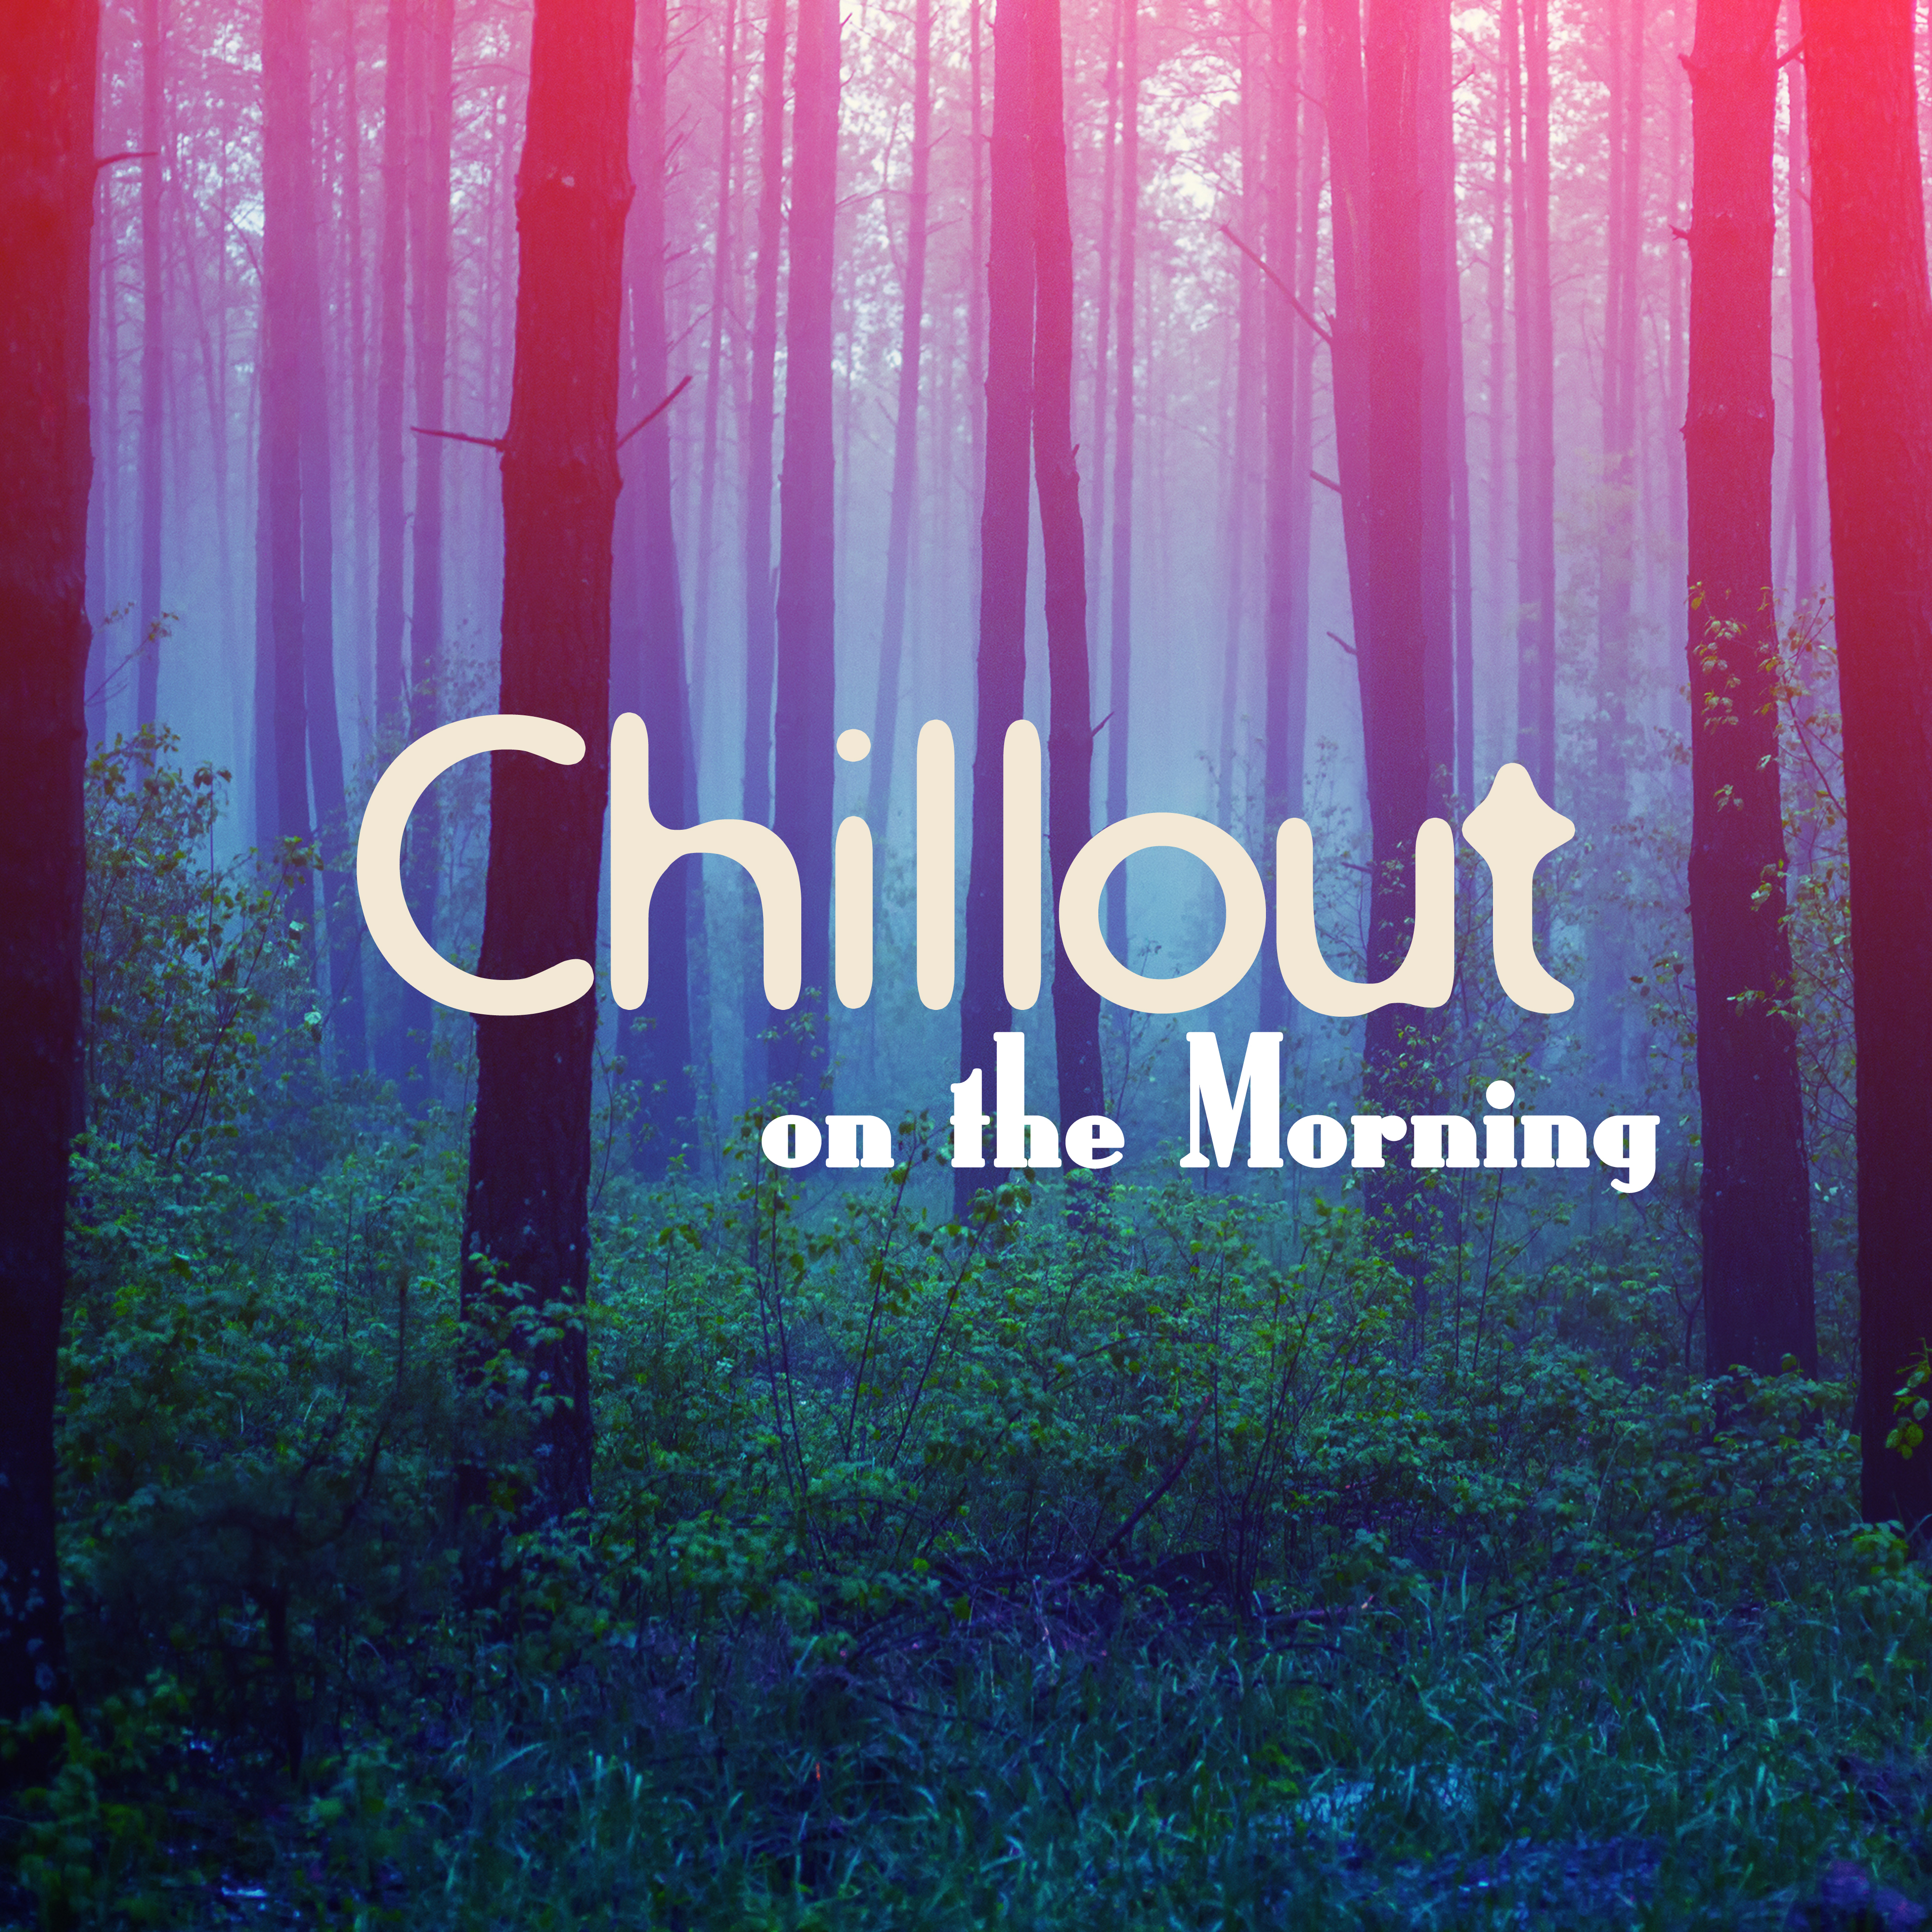 Chillout on the Morning – Relax and Chill, Chill Out 2017, Lazy Morning, Sunday Relax Time